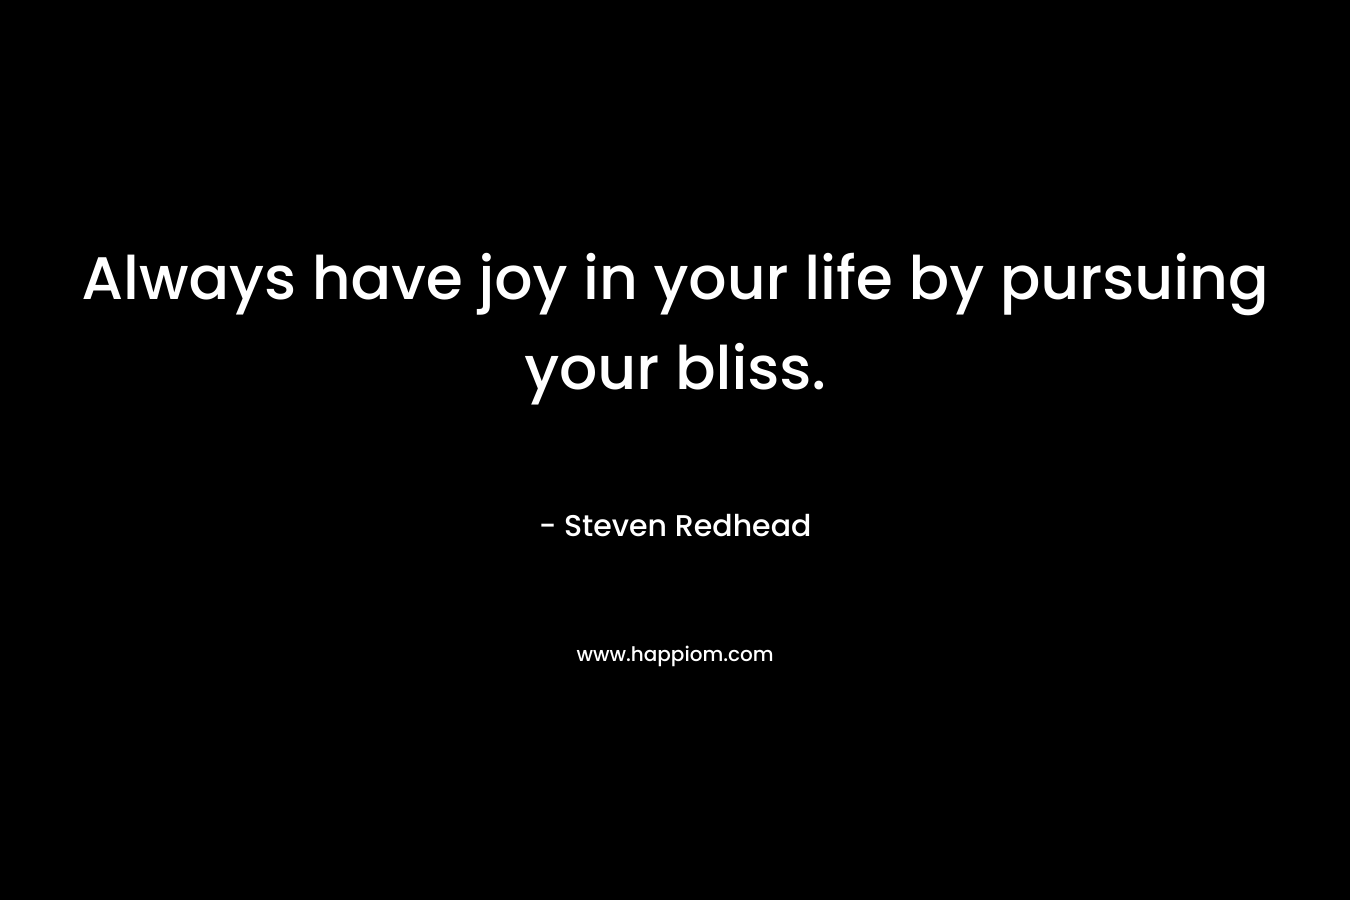 Always have joy in your life by pursuing your bliss.